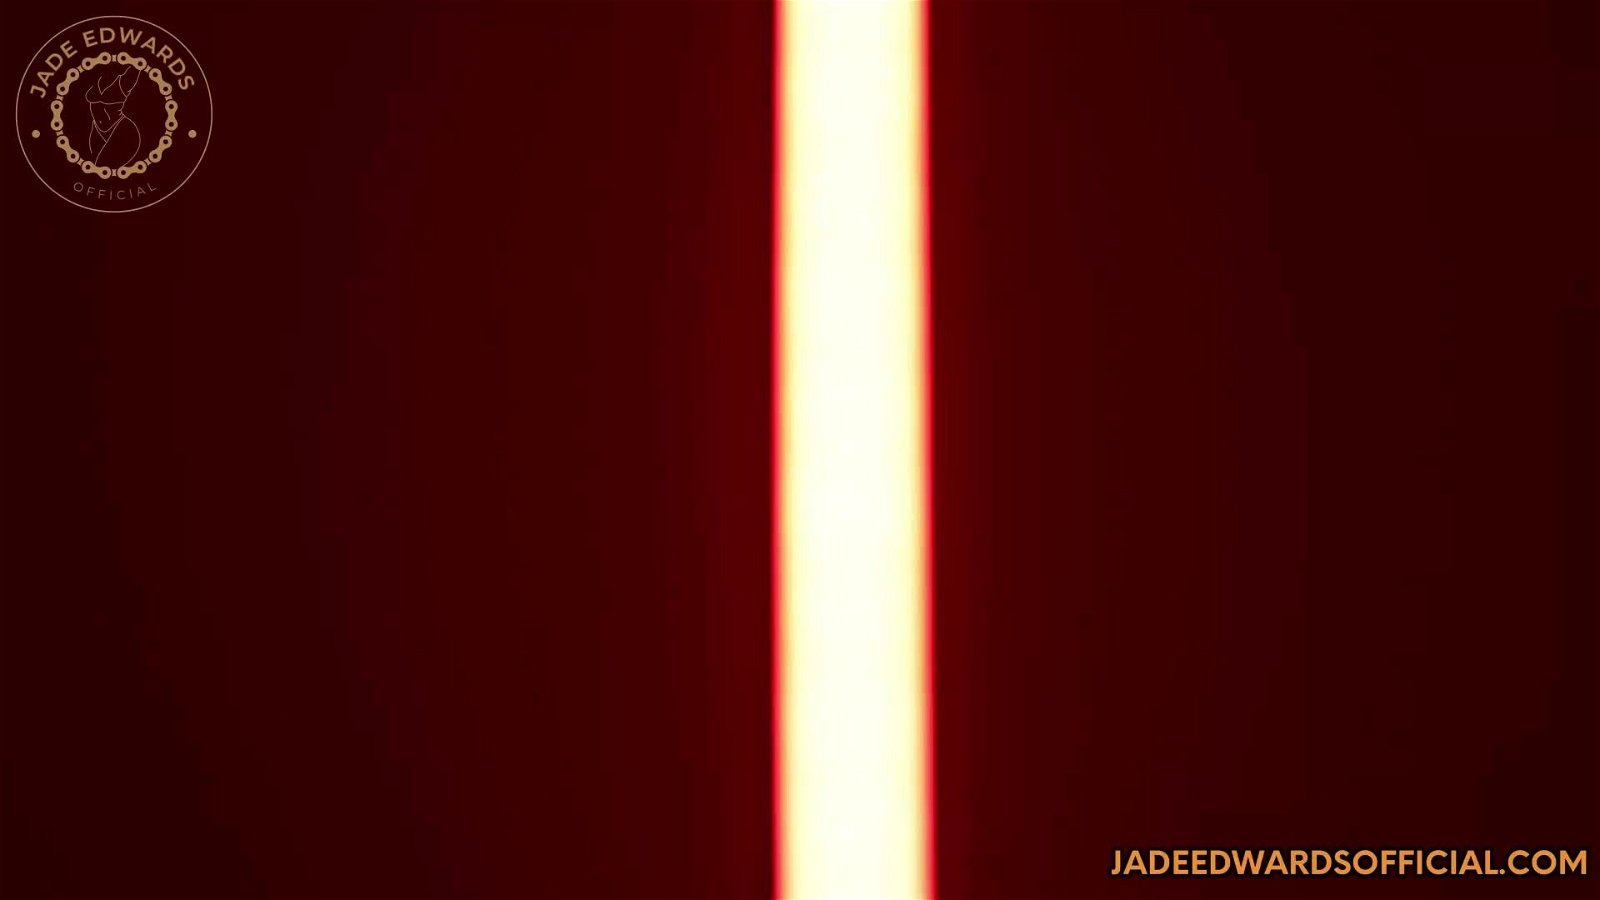 Video by hotfoxmedia1 with the username @hotfoxmedia1, who is a brand user,  April 18, 2024 at 12:29 PM and the text says 'See full red room submission video from "Jade Edwards" by clicking this link: https://jadeedwardsofficial.com/videos/13'